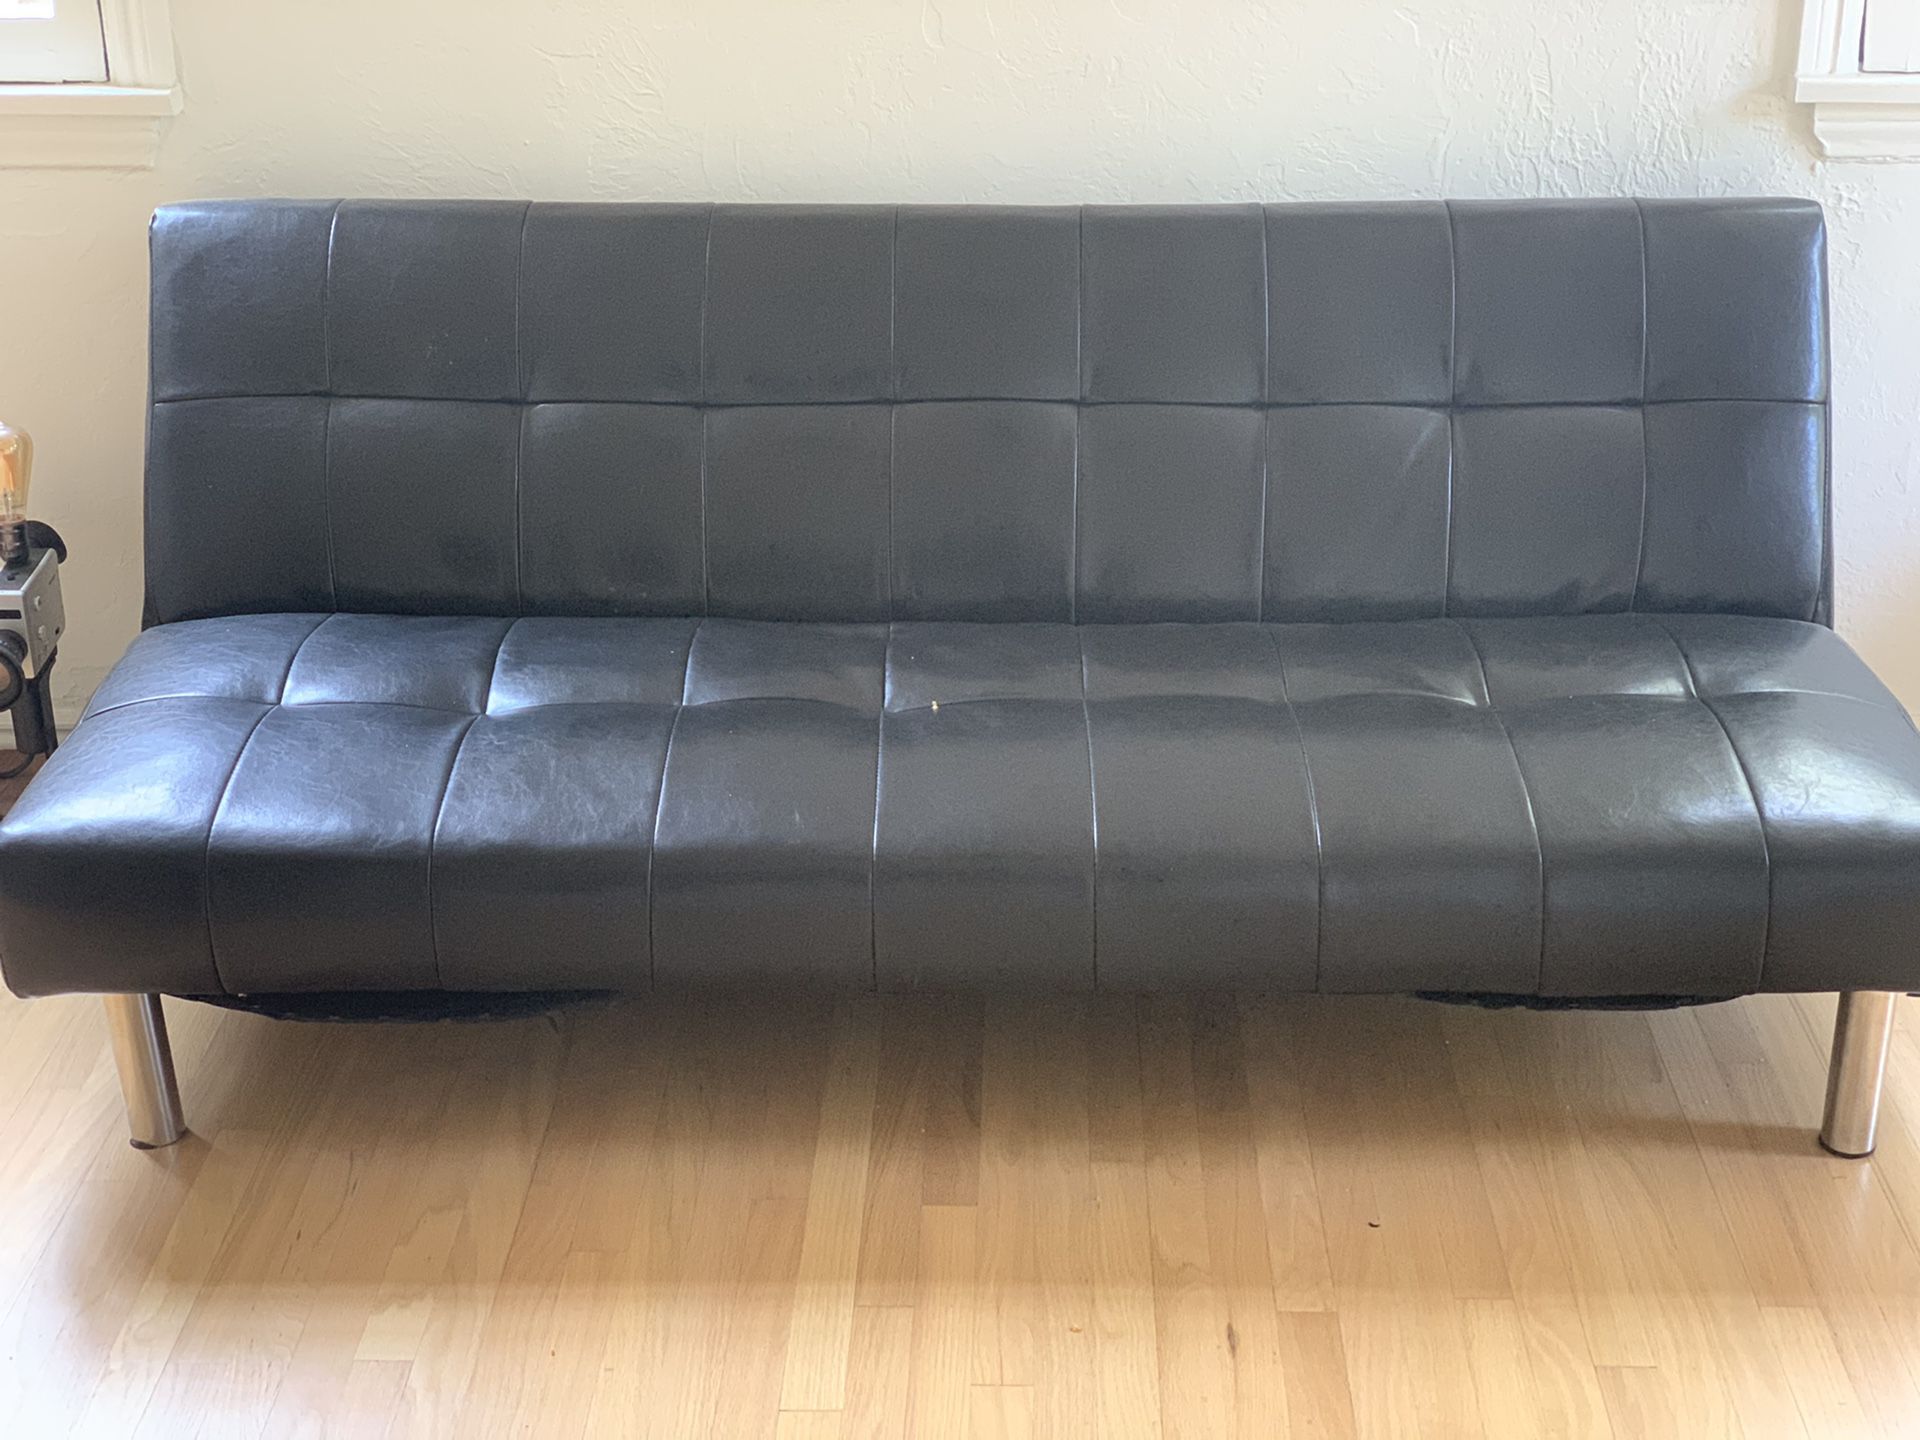 Black leather Futon Couch